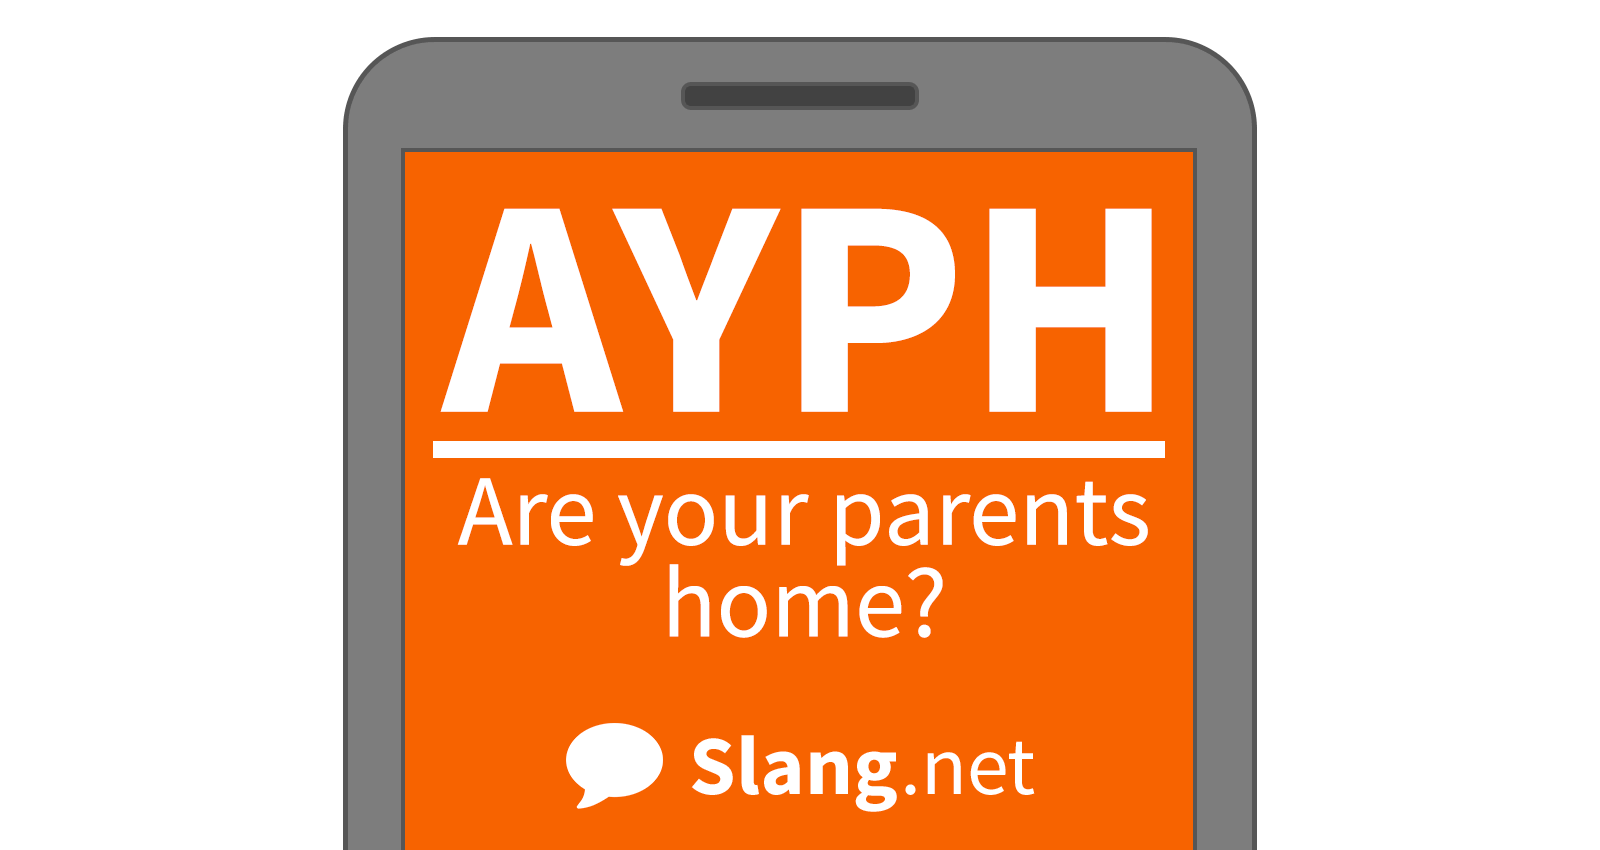 You will likely see AYPH in messages online and in texts